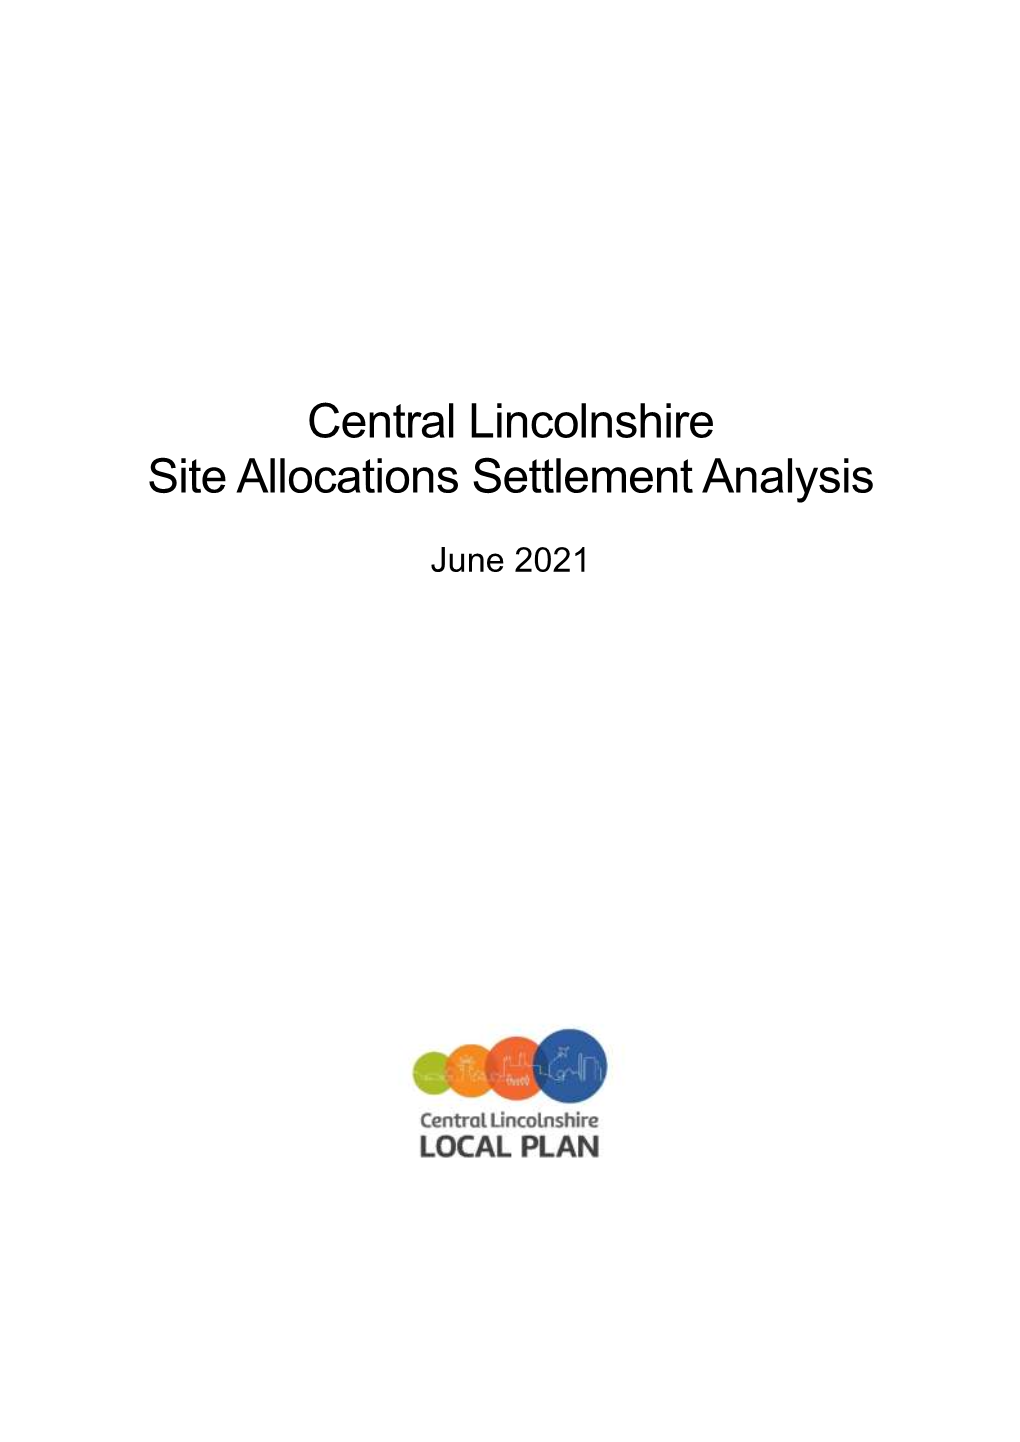 Central Lincolnshire Site Allocations Settlement Analysis